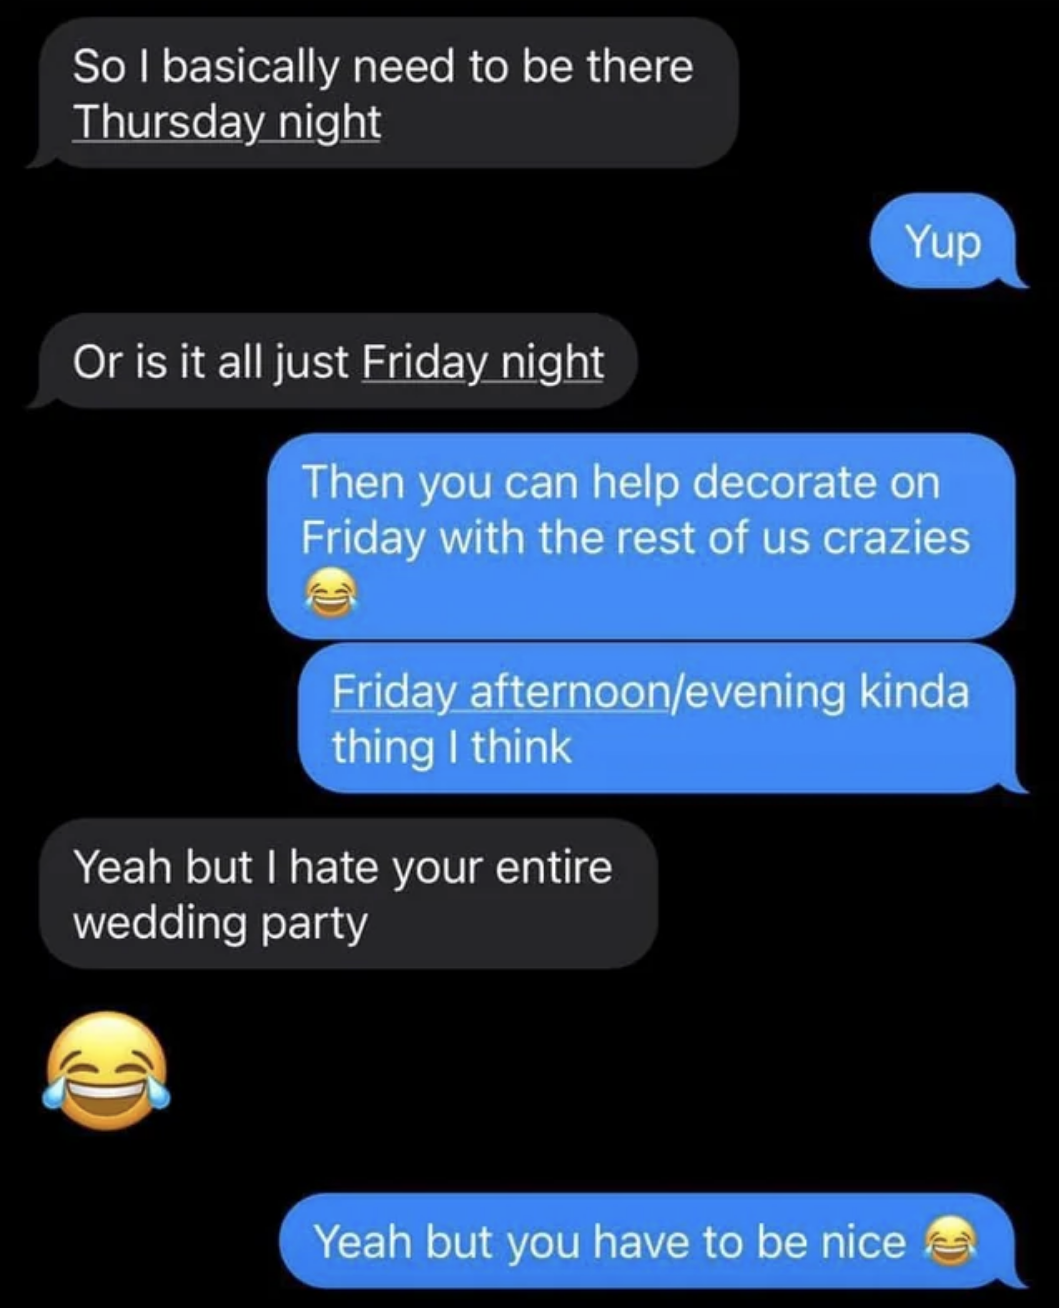 person saying they hate the whole wedding party